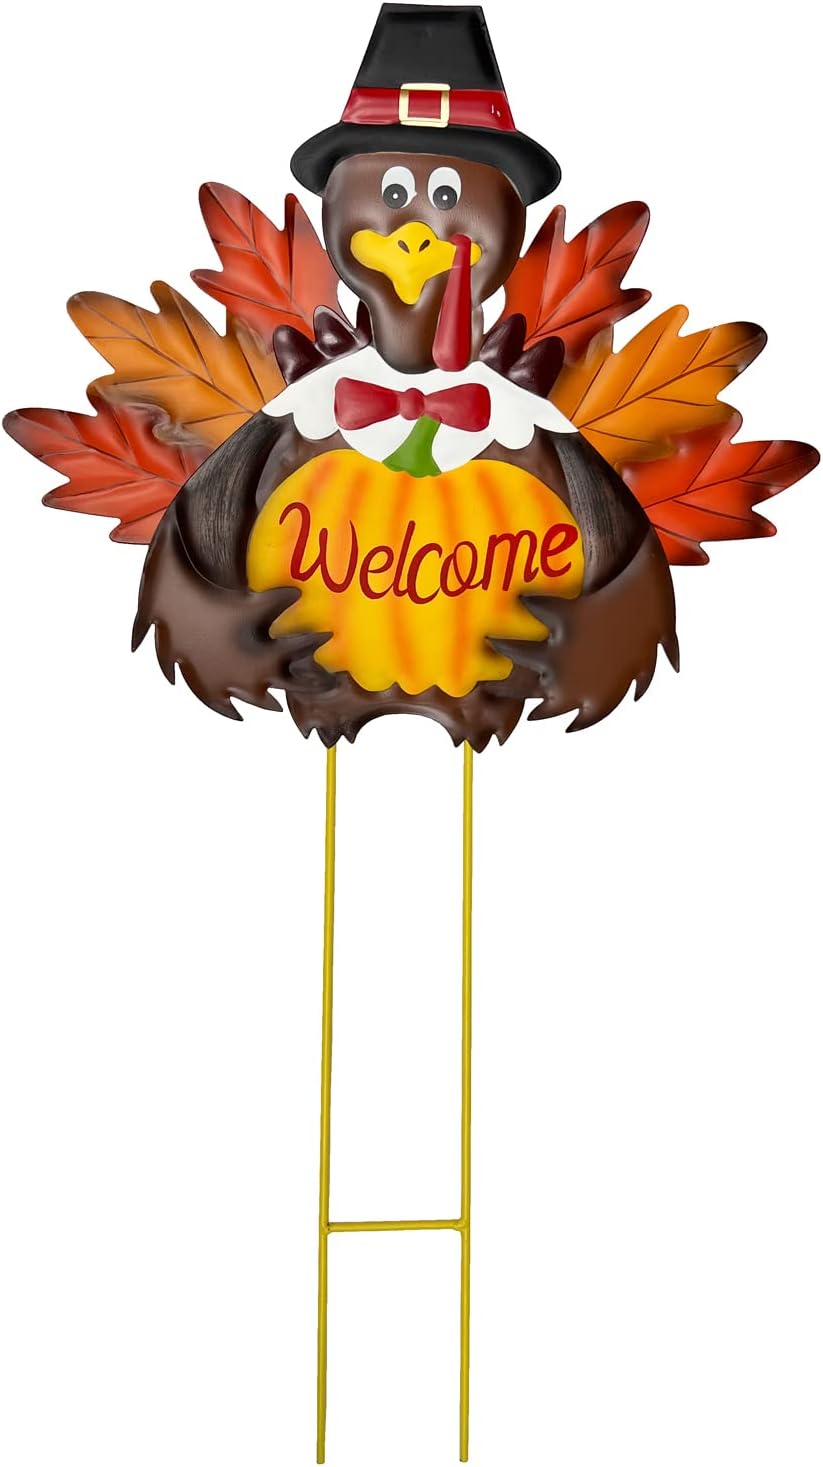 Fall Harvest Thanksgiving Metal Pumpkin Welcome Sign with Turkey Stakes Yard Decorations 28.5''H, Home Garden Patio Lawn Yard Decor Fall Harvest Thanksgiving Outdoor Decorations